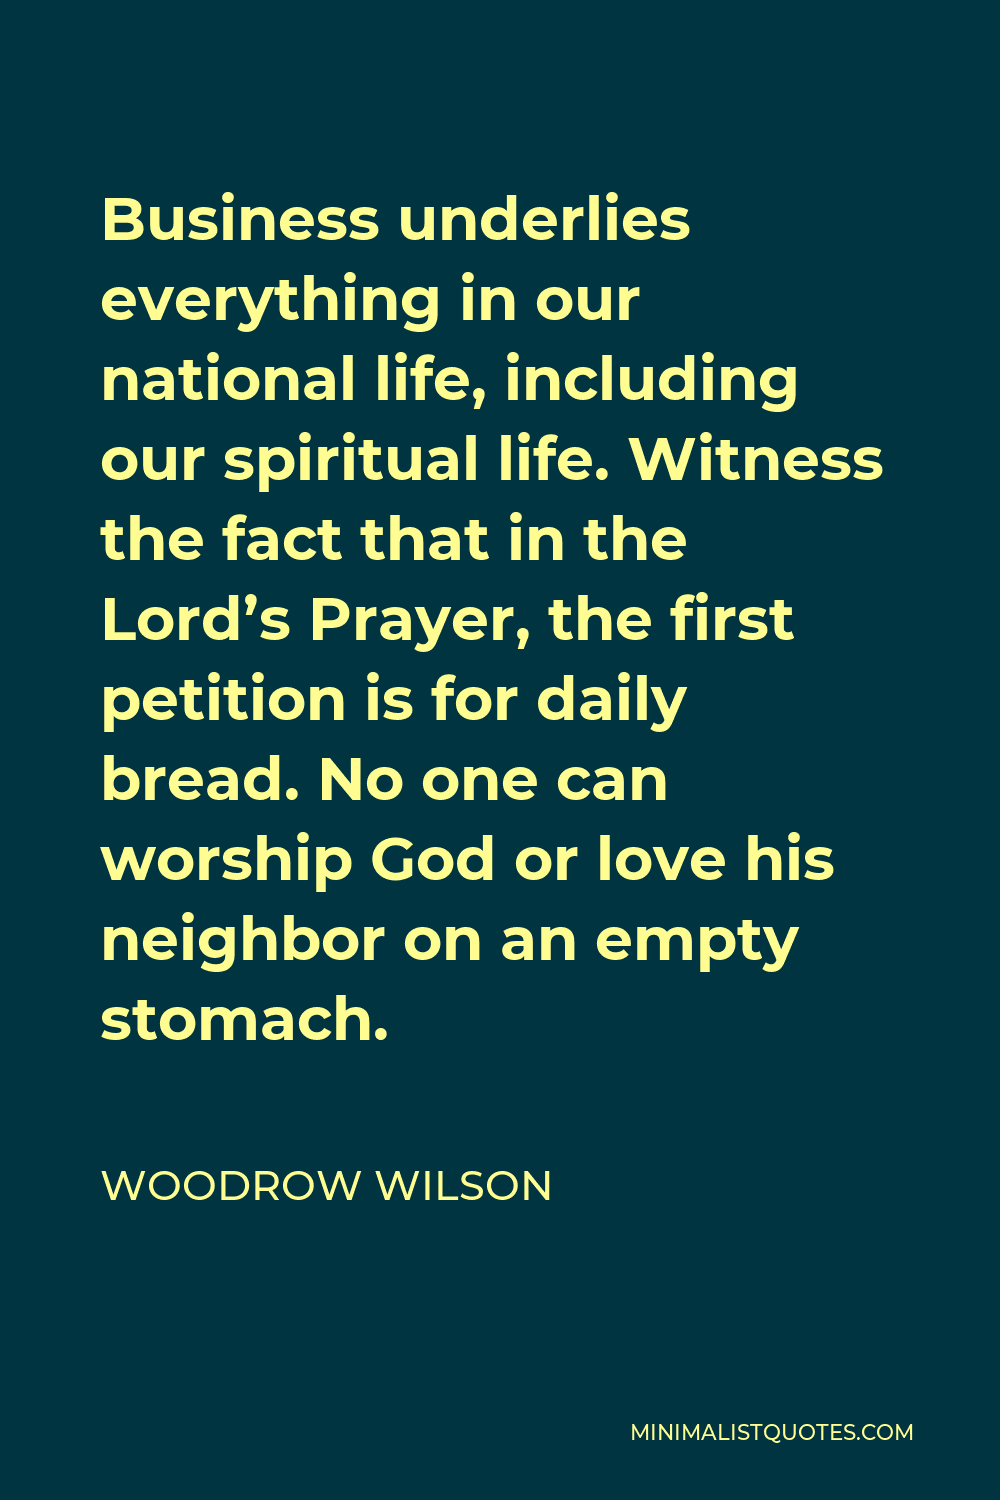 Woodrow Wilson Quote - Business underlies everything in our national life, including our spiritual life. Witness the fact that in the Lord’s Prayer, the first petition is for daily bread. No one can worship God or love his neighbor on an empty stomach.